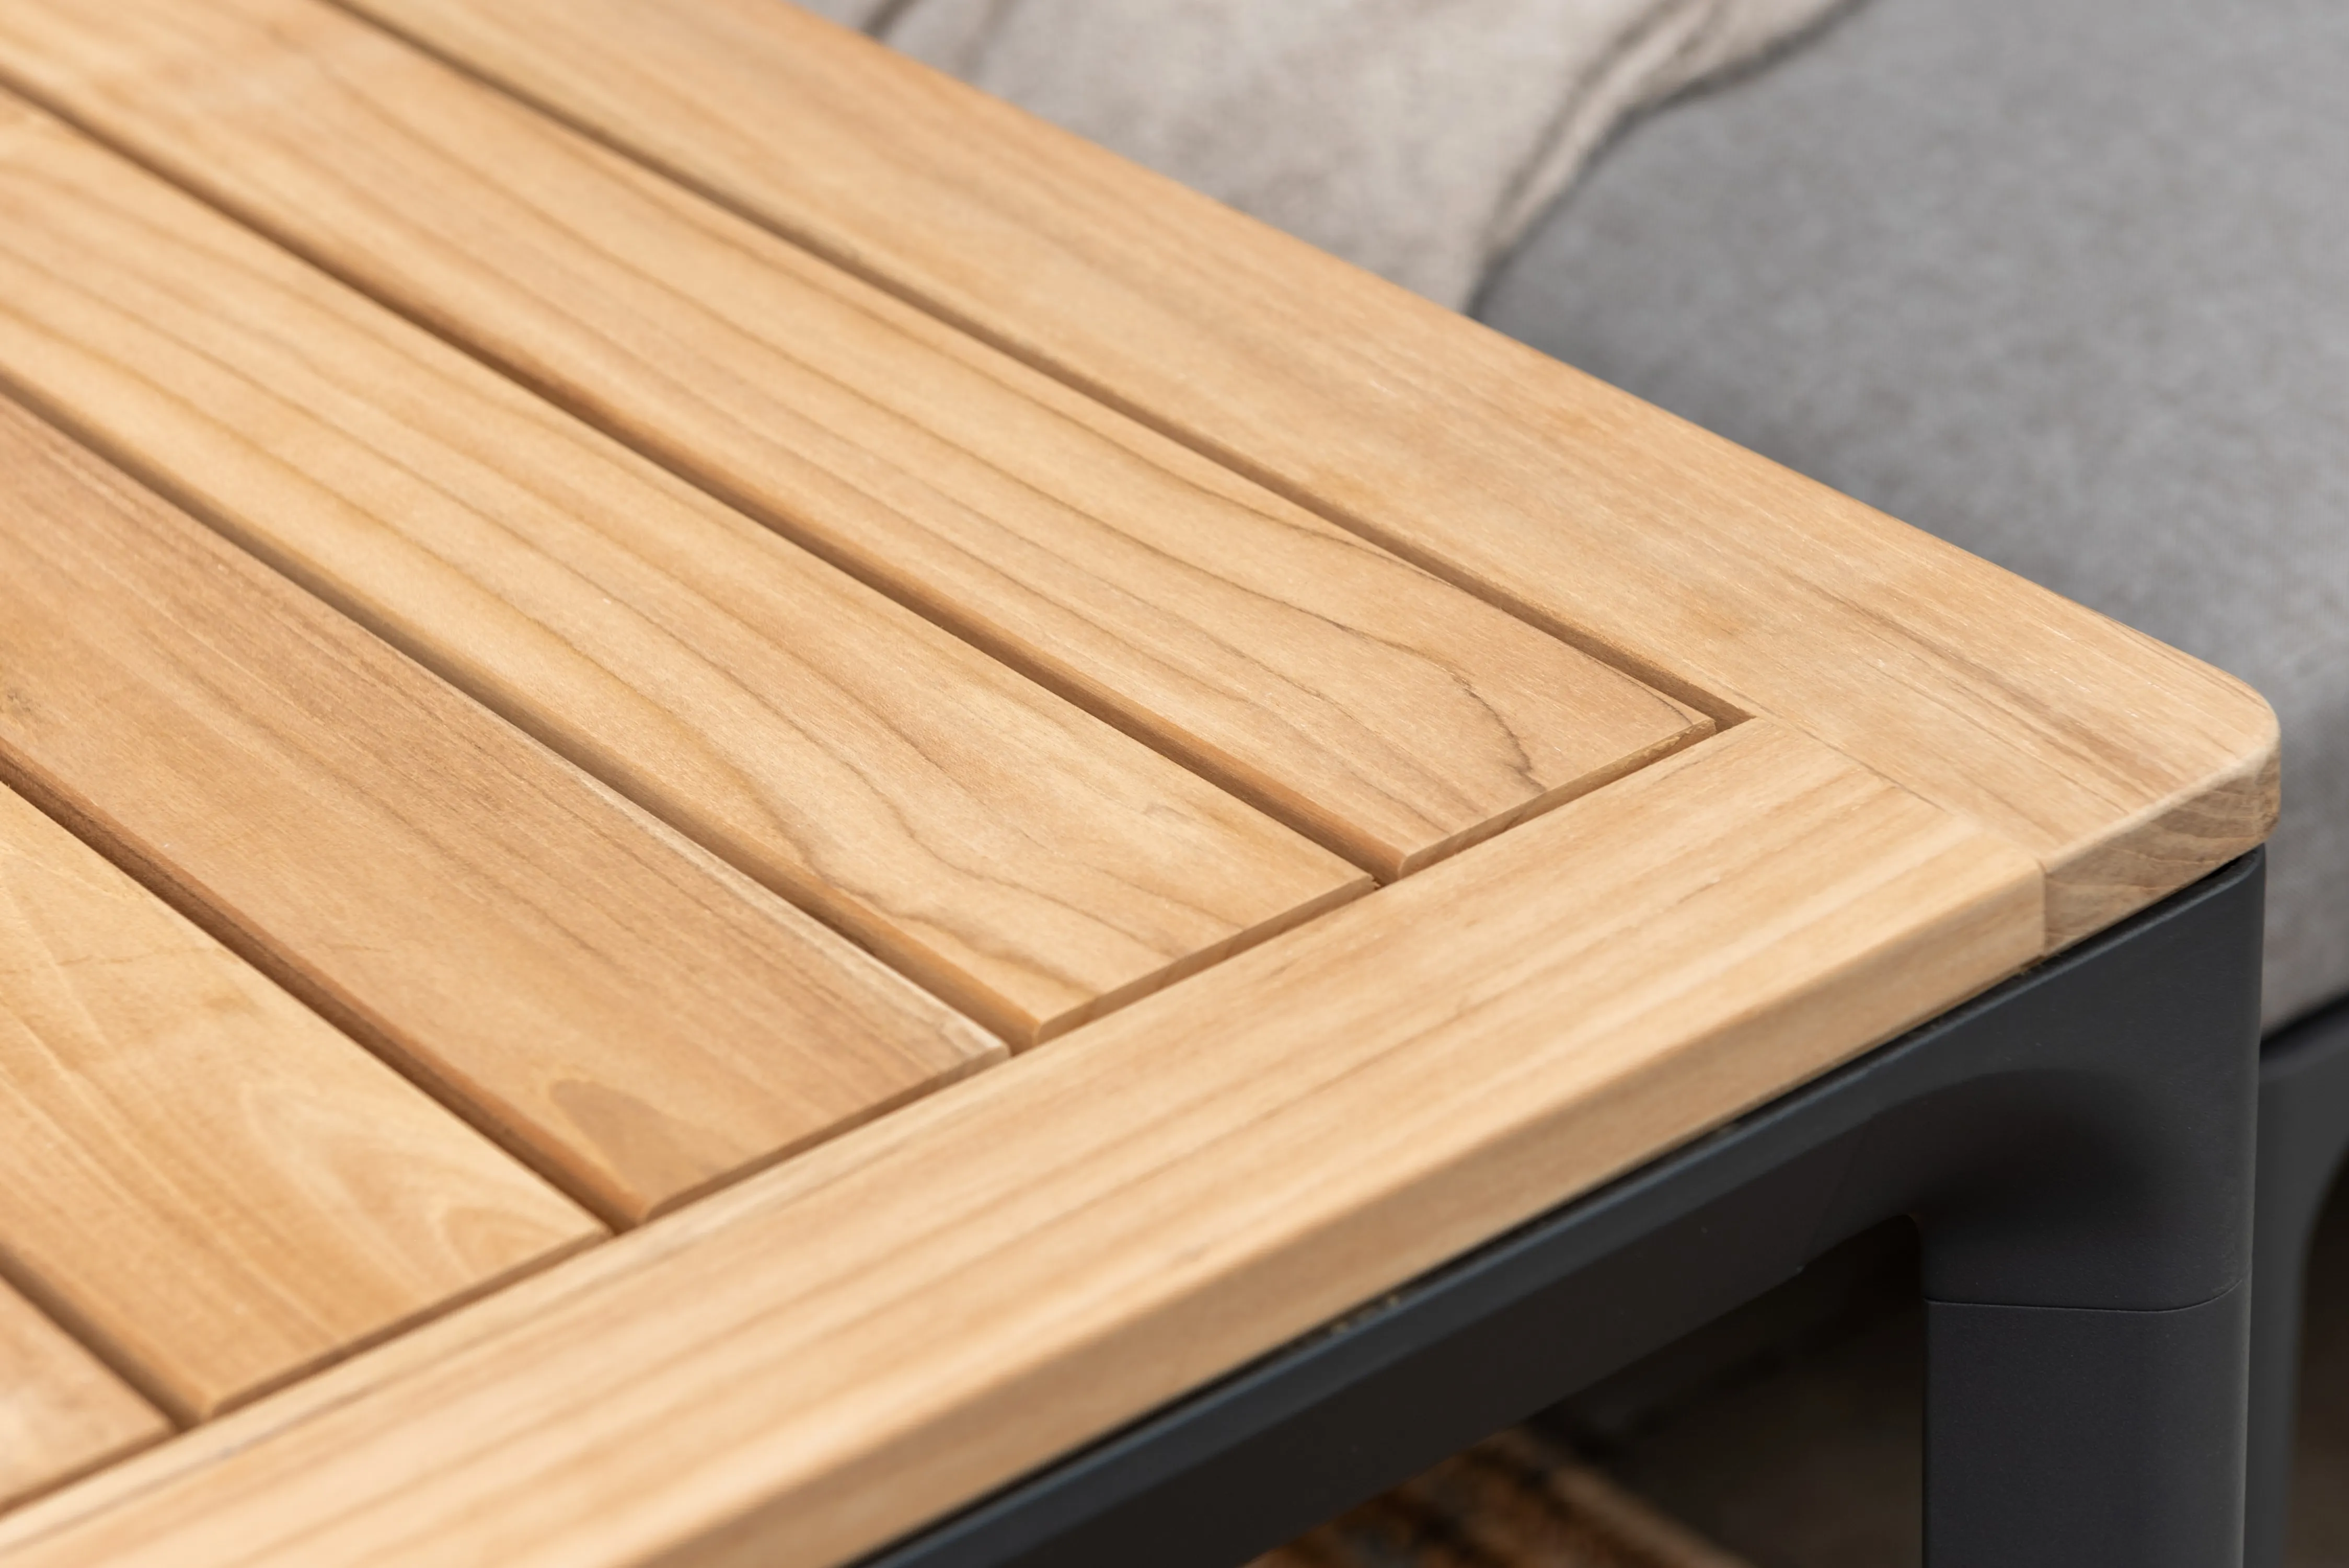 FSC Teak - A Naturally Ideal Material for Outdoor Furniture